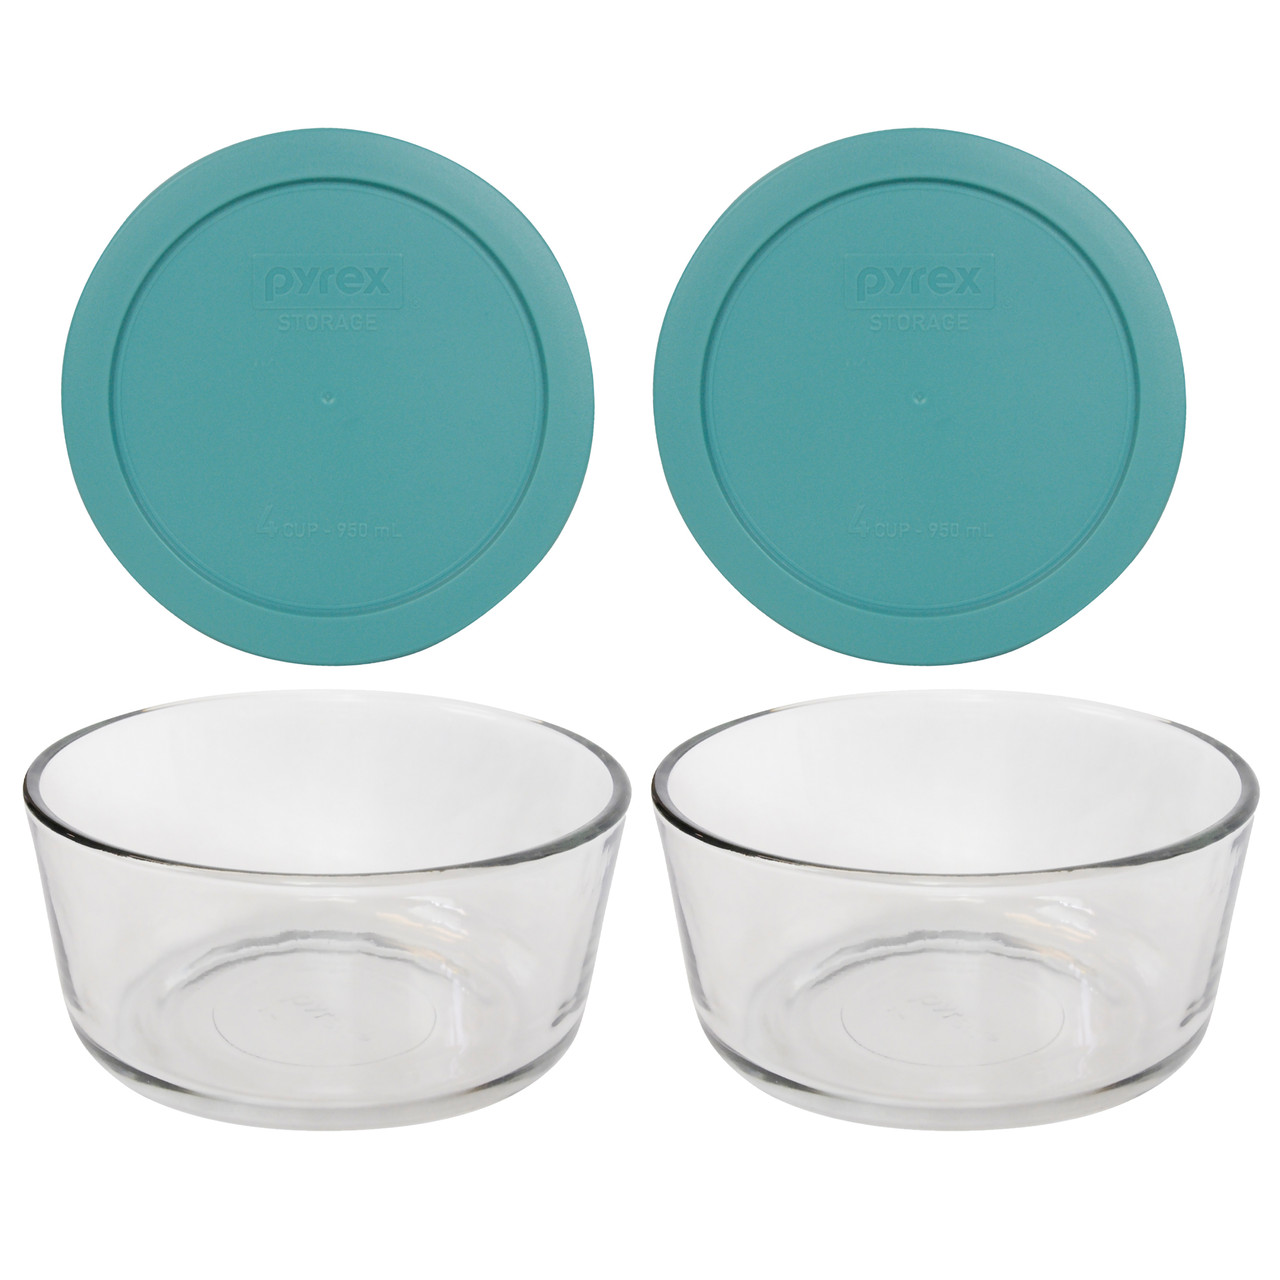 Pyrex 7200 2-Cup Glass Storage Bowl w/ 7200-PC 2-Cup Turquoise Lid Cover